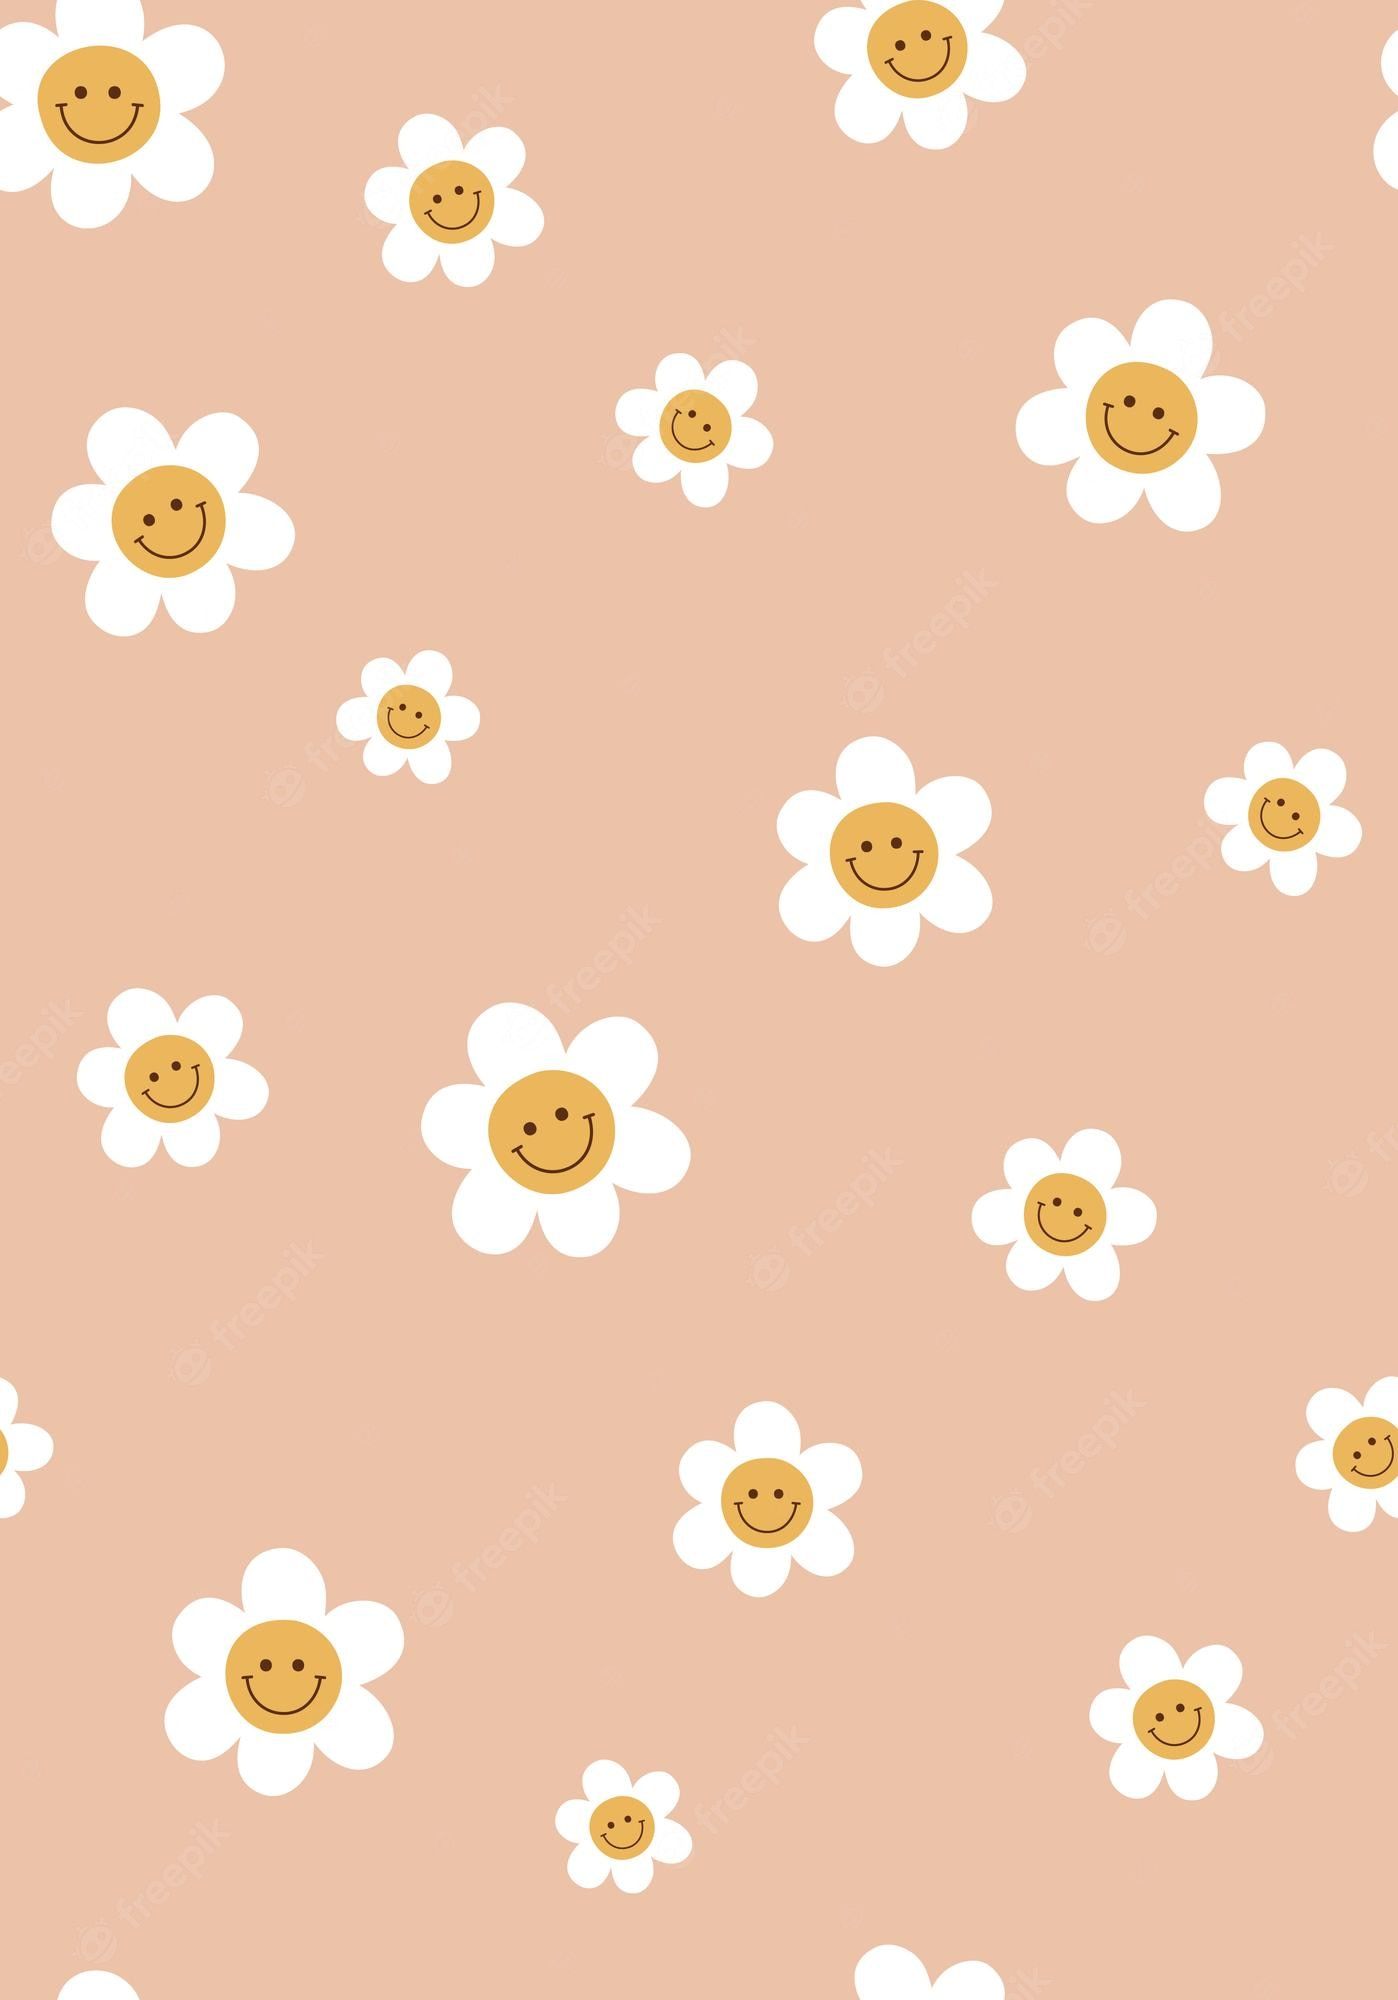 A wallpaper with a pattern of white flowers with yellow smiley faces in the center on a salmon pink background - 60s, flower, cute, 70s, fashion, pattern, 80s, daisy, illustration, pastel minimalist